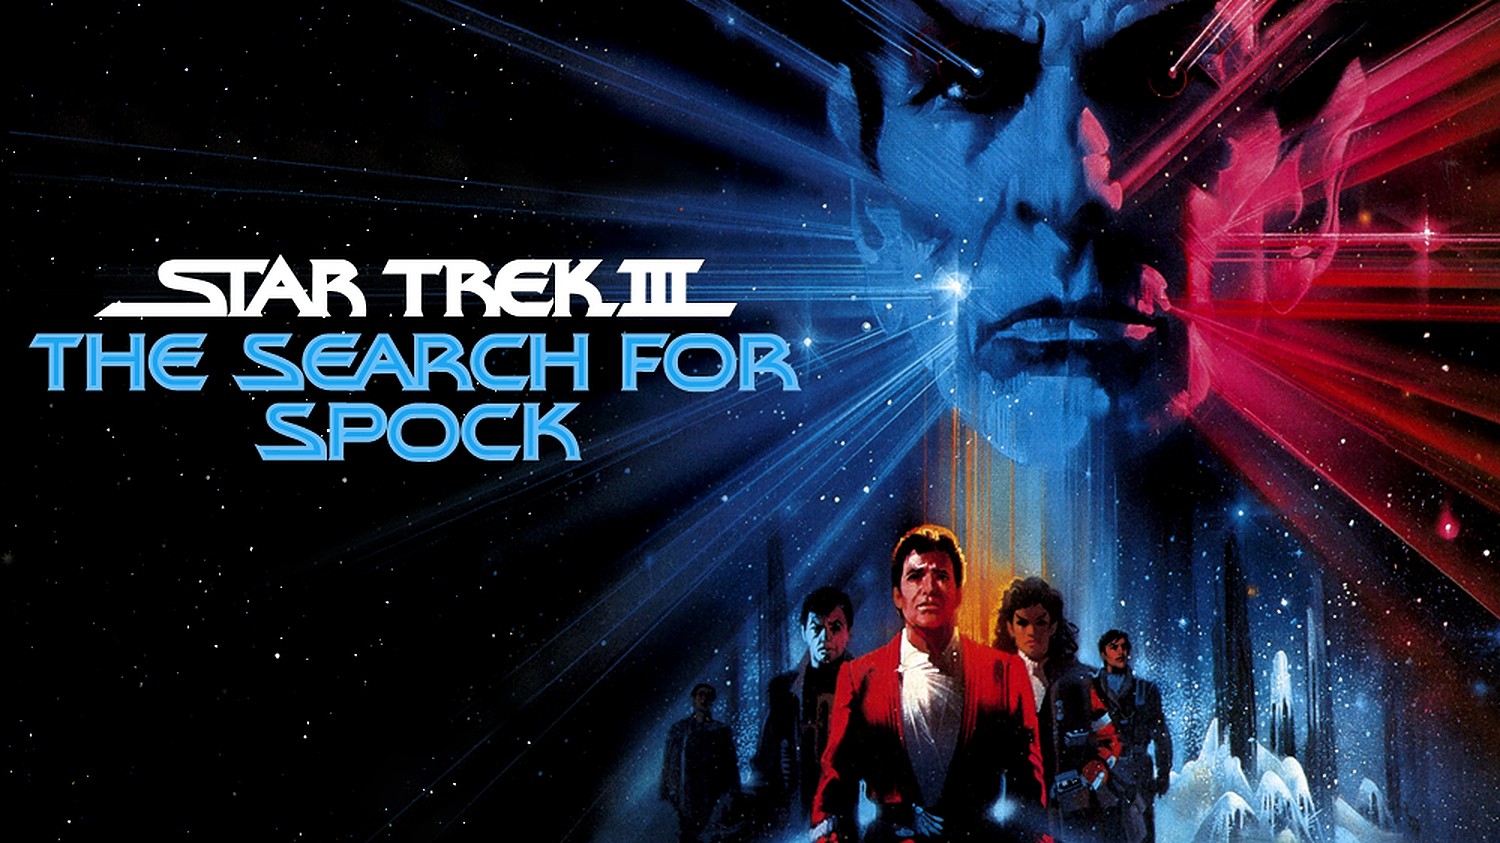 48-facts-about-the-movie-star-trek-iii-the-search-for-spock